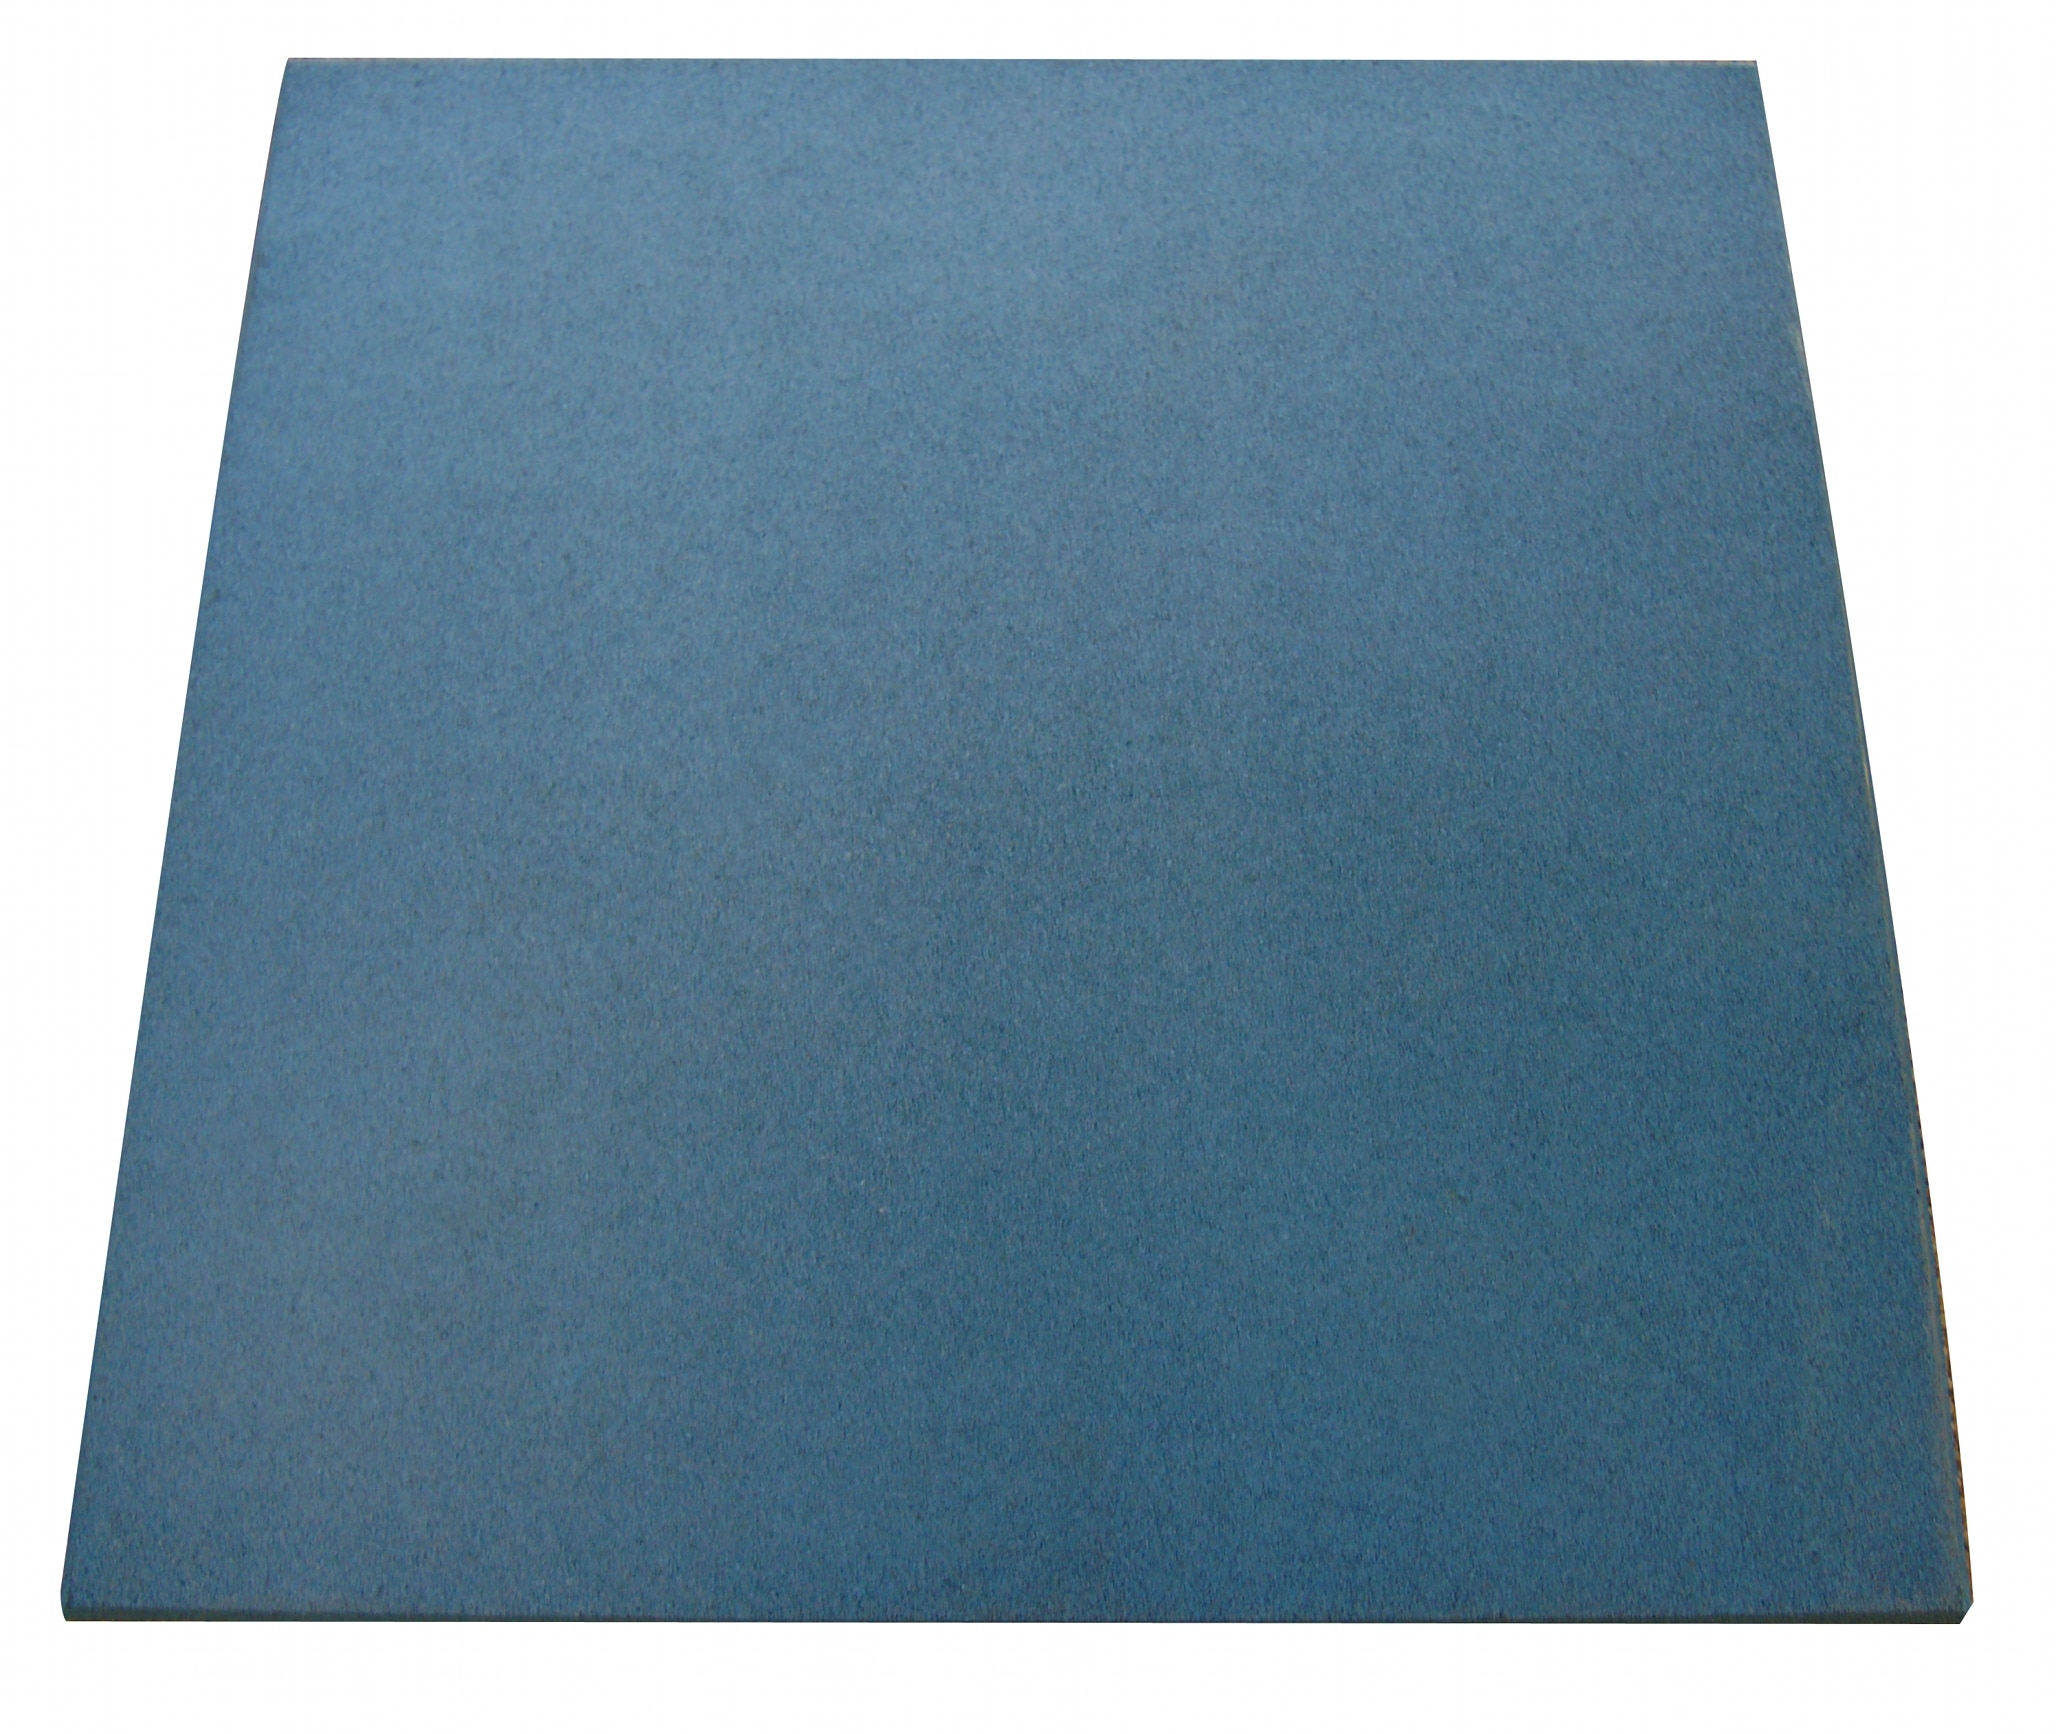 48 Sqr/Ft Coverage Light Blue in Color Rubber-Cal Eco-Sport 1-inch Interlocking Flooring Tiles 18 Pack 1 x 20 x 20-inch Rubber Tile